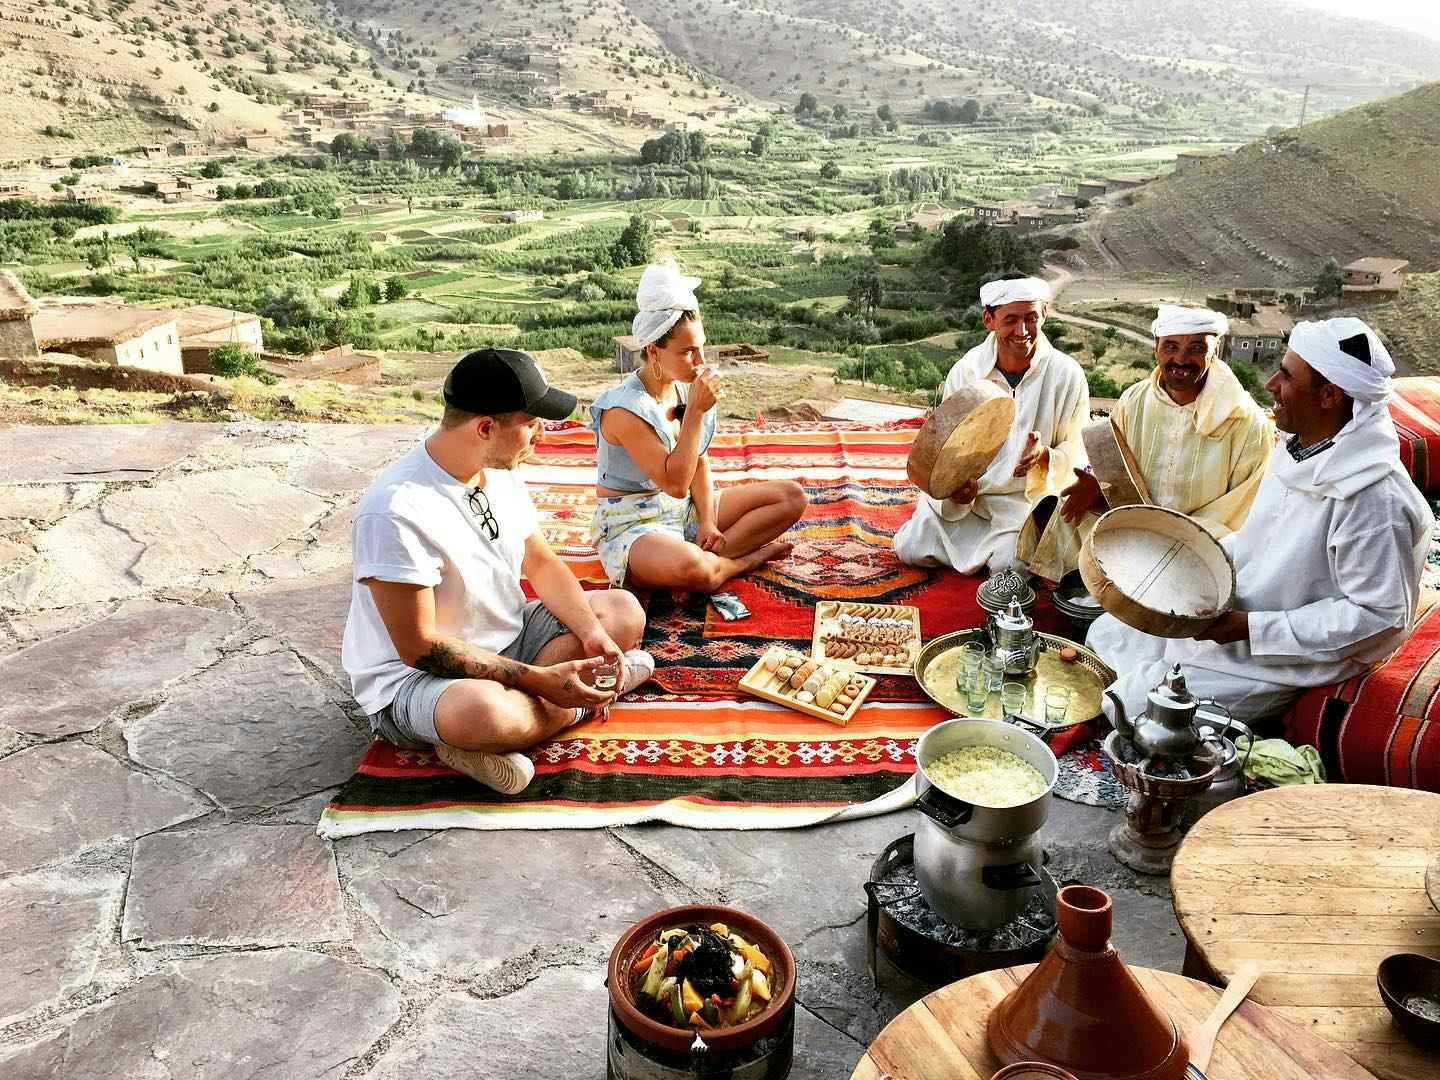 People talking and eating on a Moroccan rug with a view of the valley behind